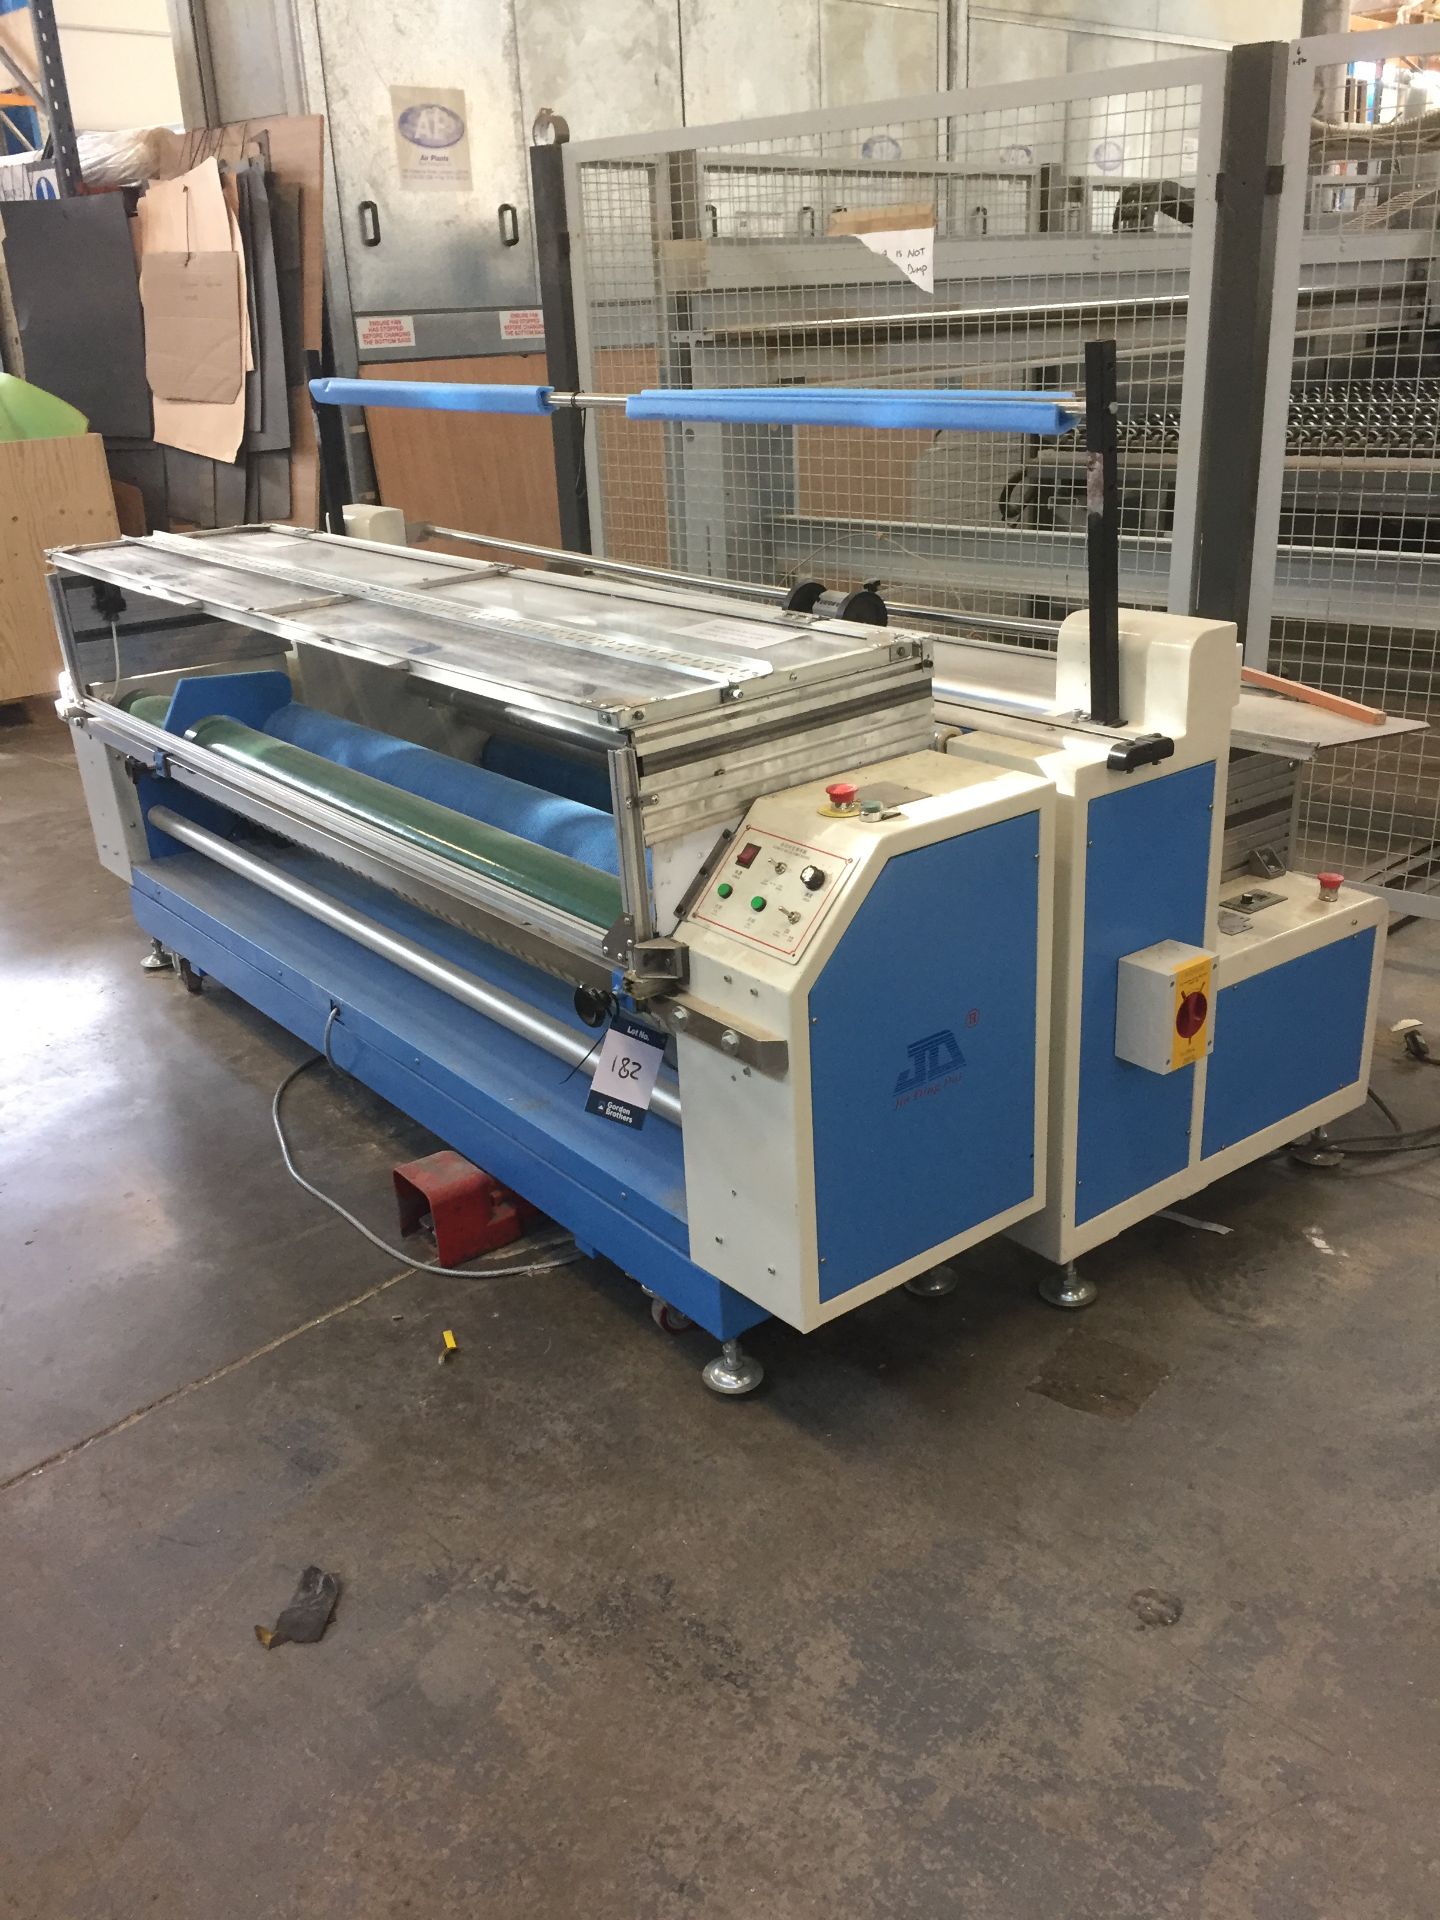 JD Automatic rolling fabric machine (240v) Model No. YFD-2100 F11(2019) Capacity 2100mm ** This